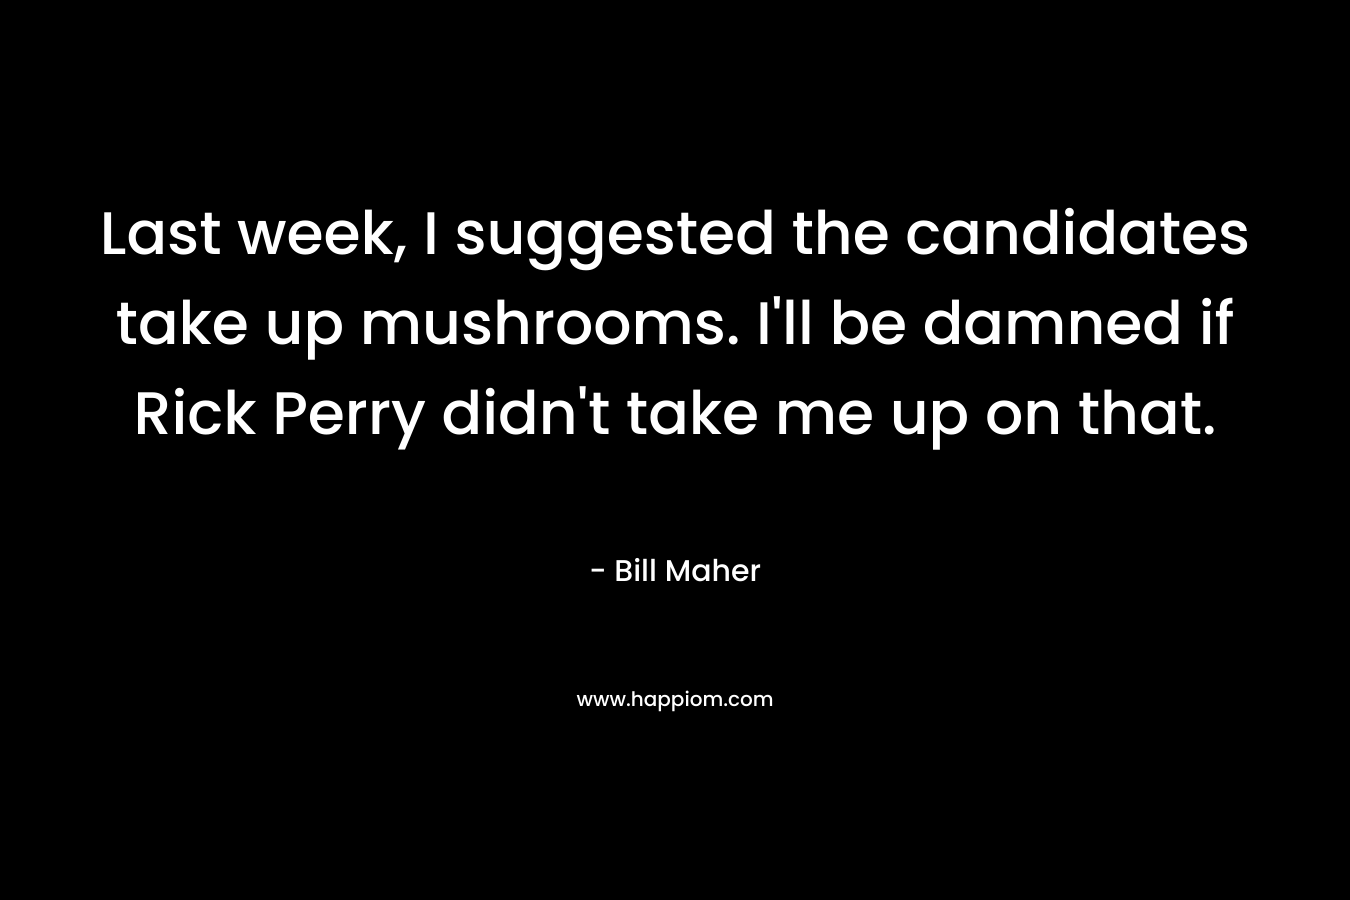 Last week, I suggested the candidates take up mushrooms. I’ll be damned if Rick Perry didn’t take me up on that. – Bill Maher